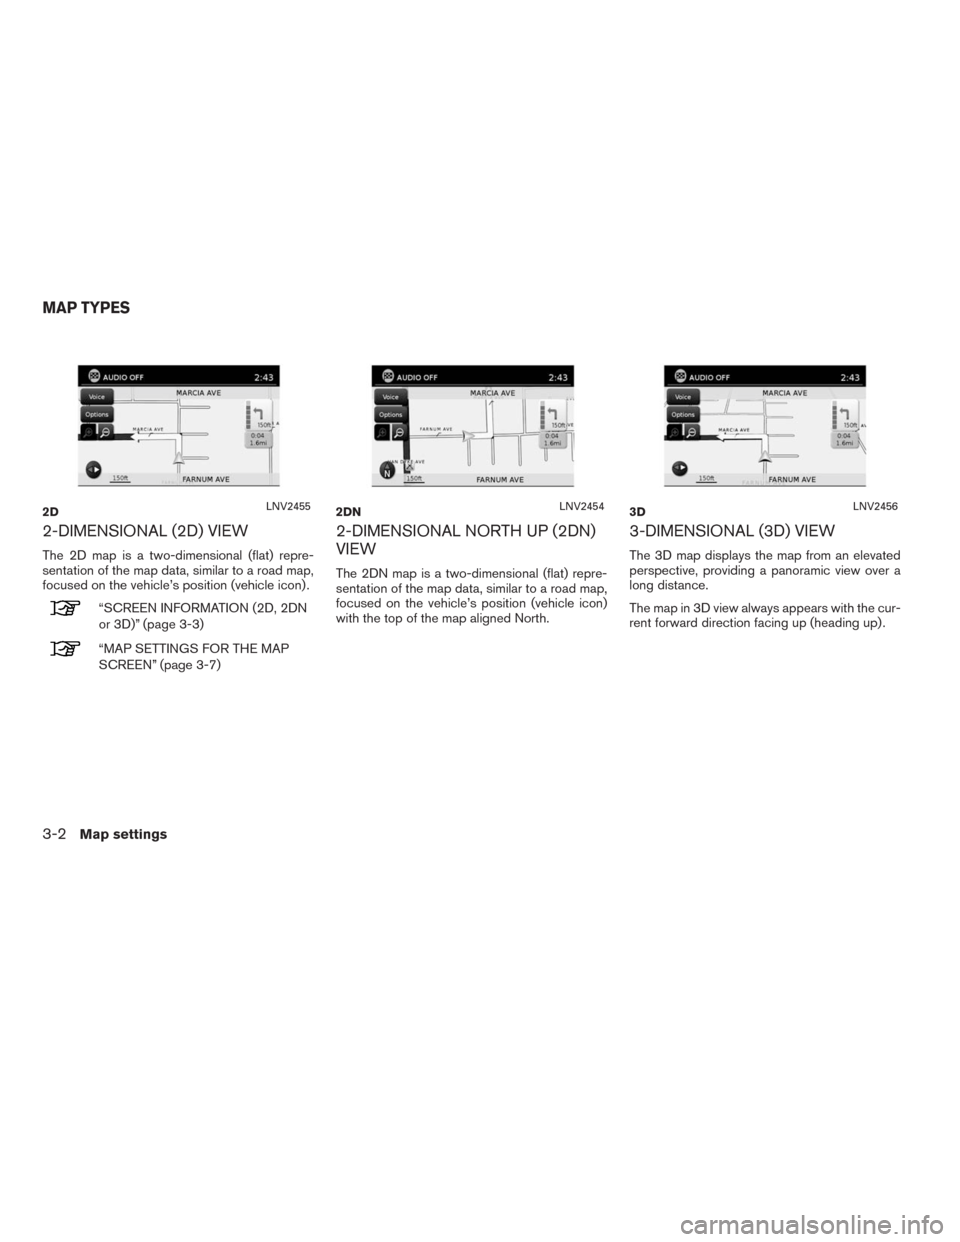 NISSAN FRONTIER 2015 D23 / 3.G LC2 Kai Navigation Manual 2-DIMENSIONAL (2D) VIEW
The 2D map is a two-dimensional (flat) repre-
sentation of the map data, similar to a road map,
focused on the vehicle’s position (vehicle icon) .
“SCREEN INFORMATION (2D, 